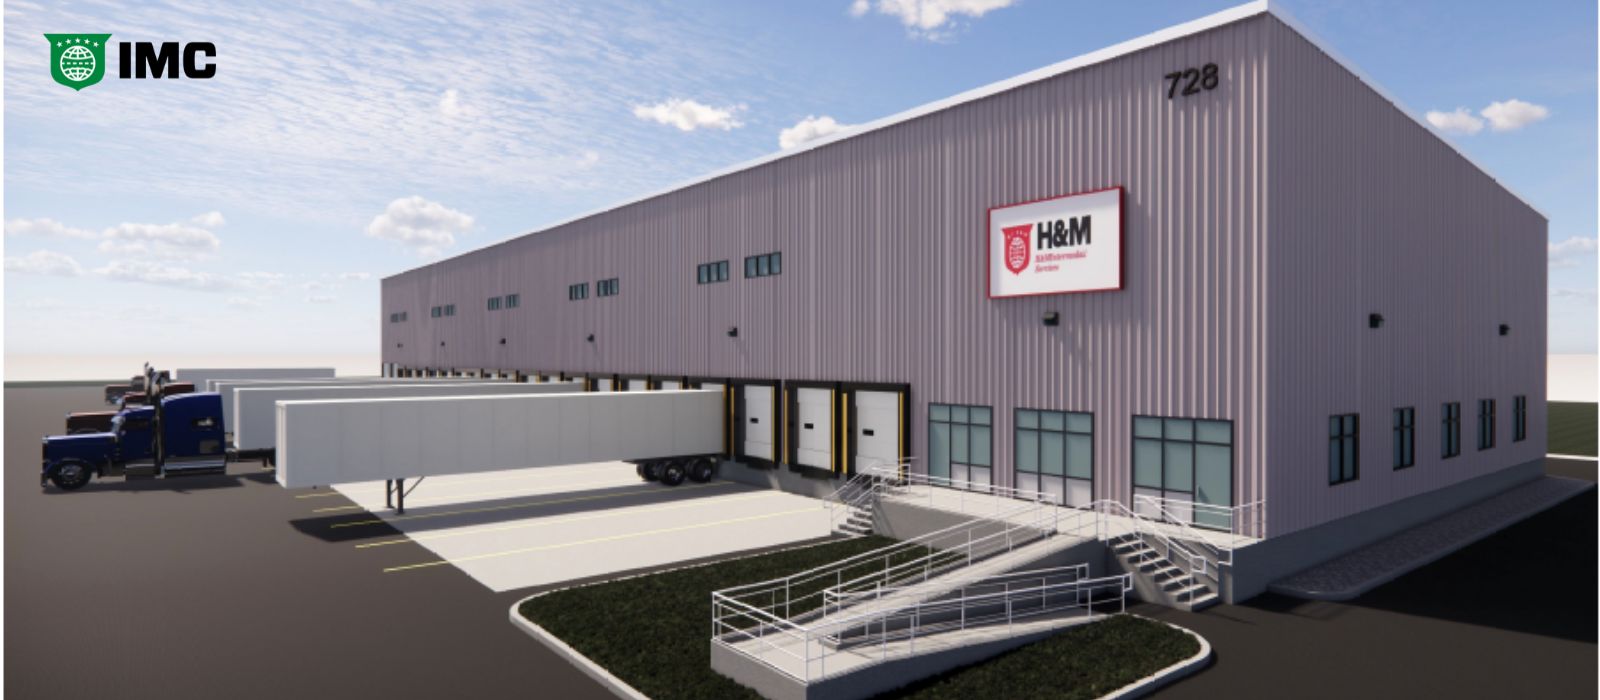 IMC and H&M Intermodal Expands with New Depot